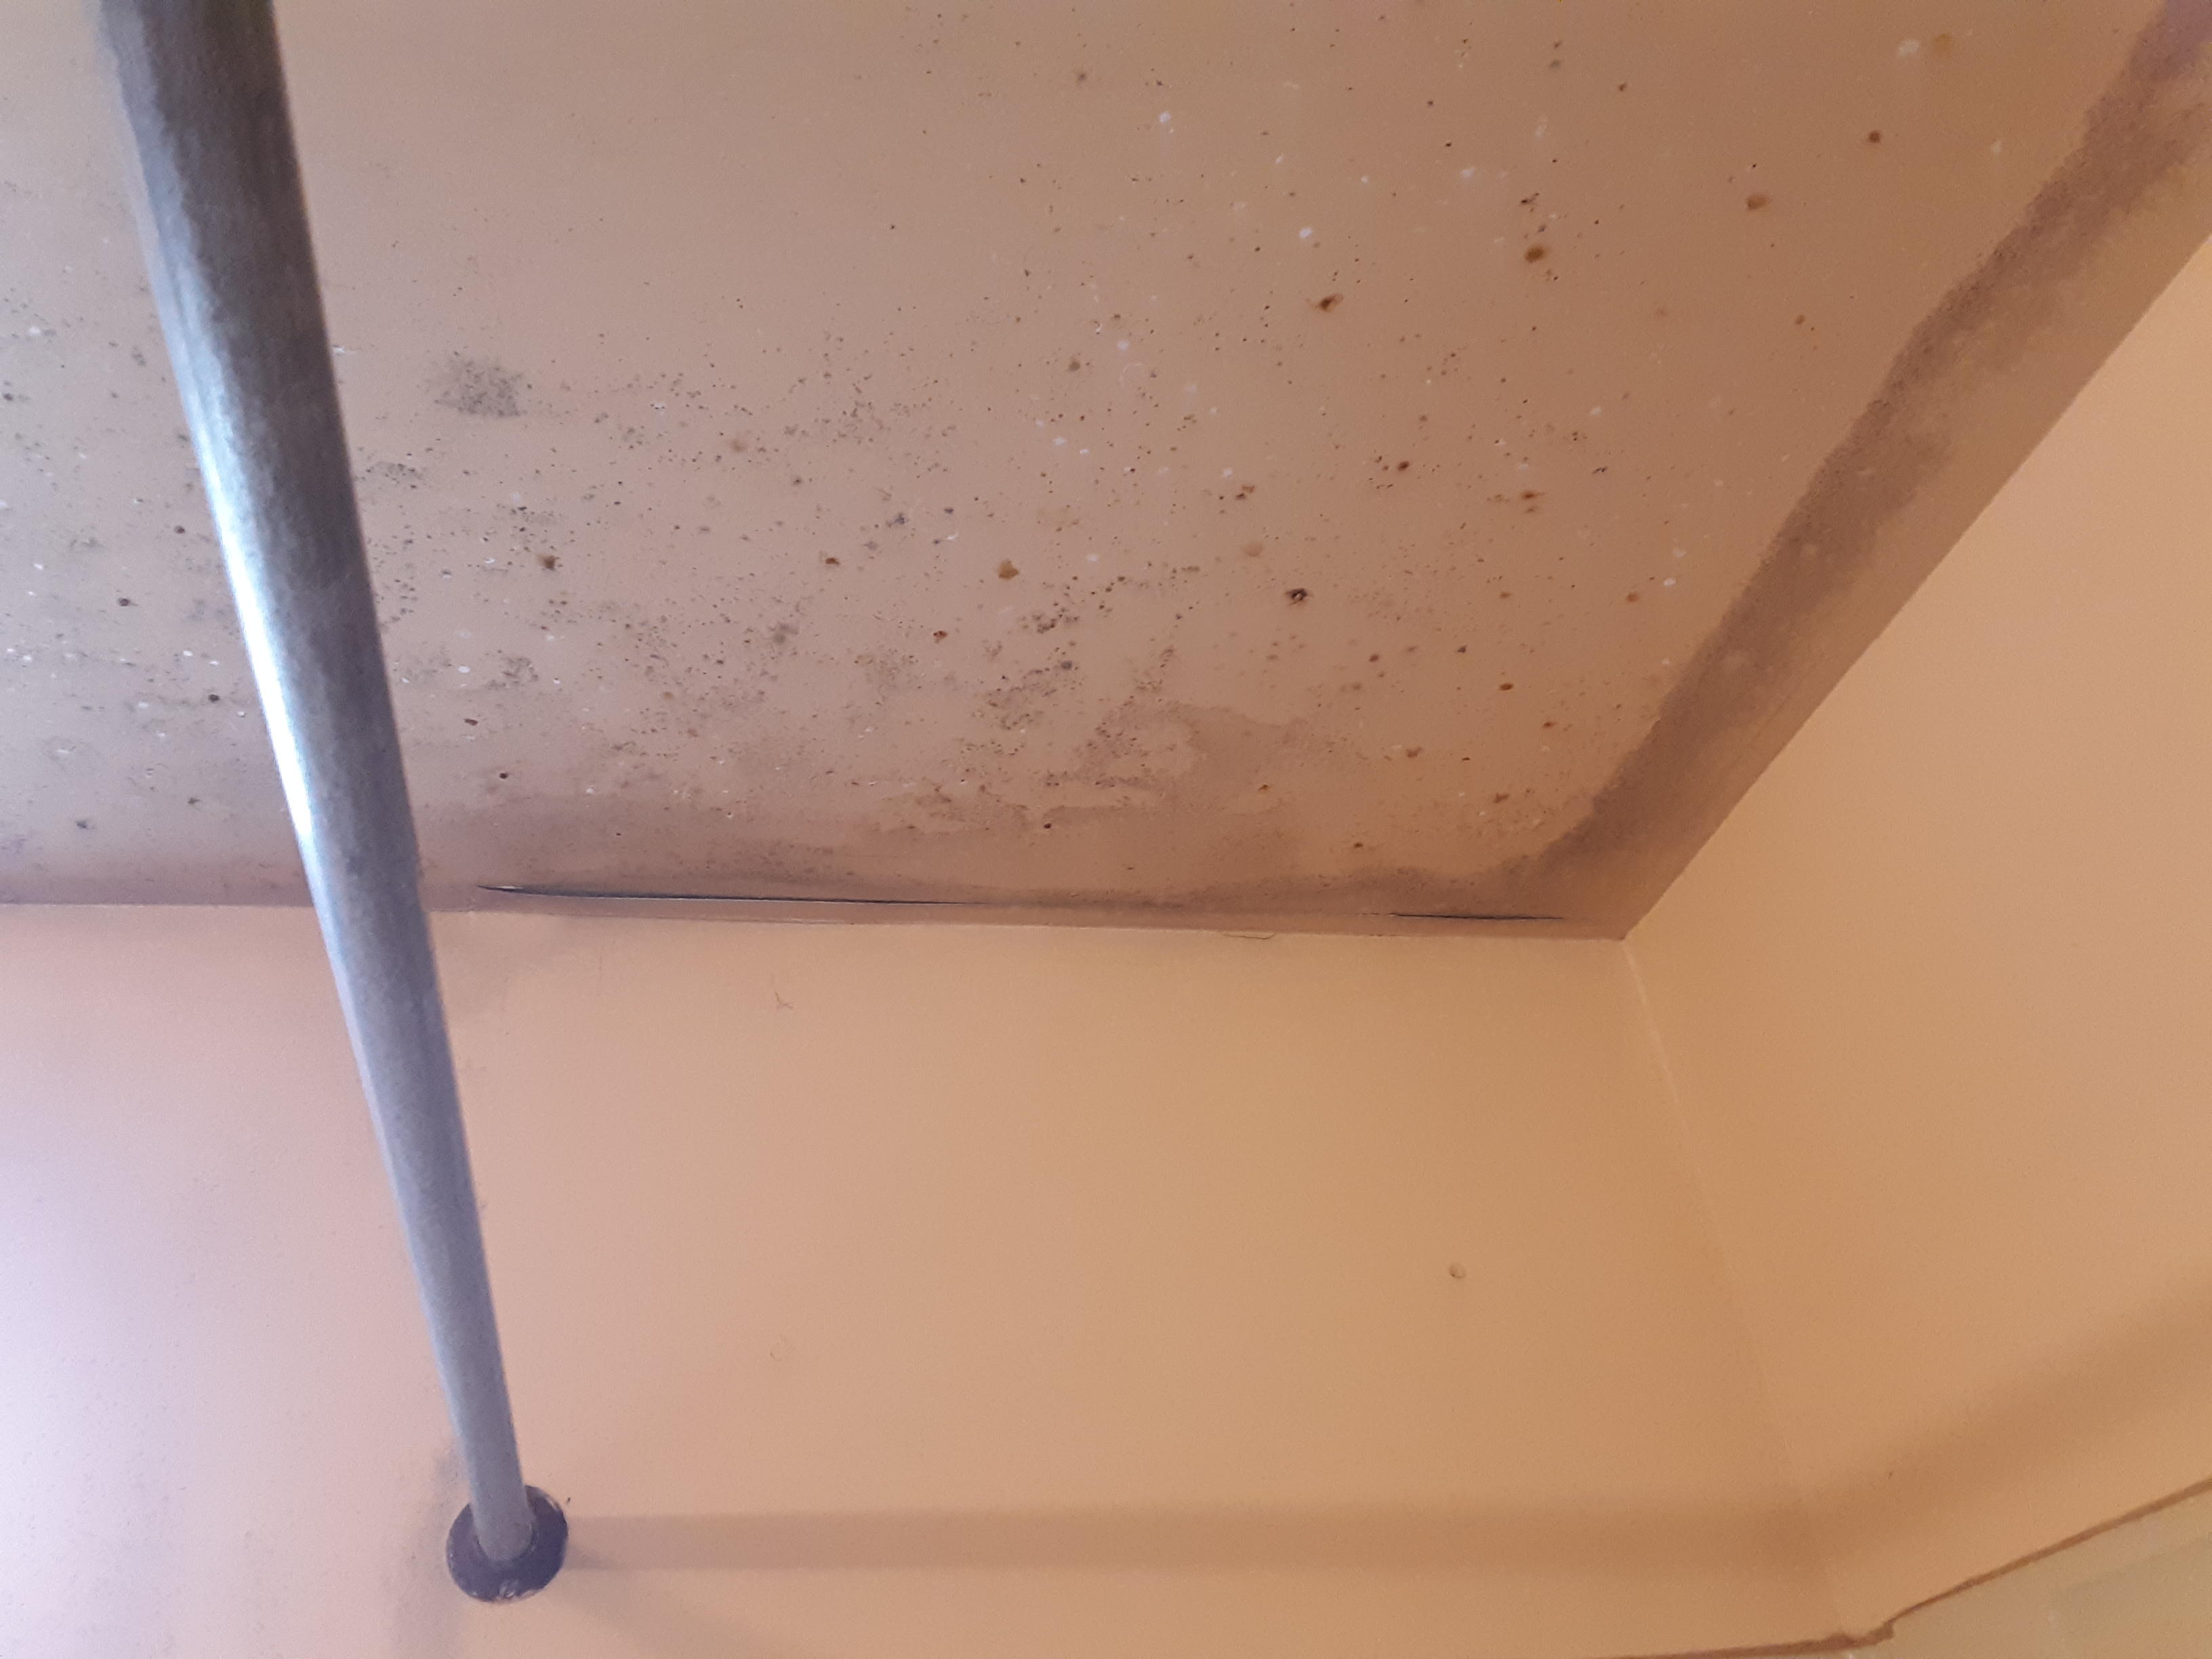 Can you spot the mold?  Our crews worked hard to make it "Like it never even happened."